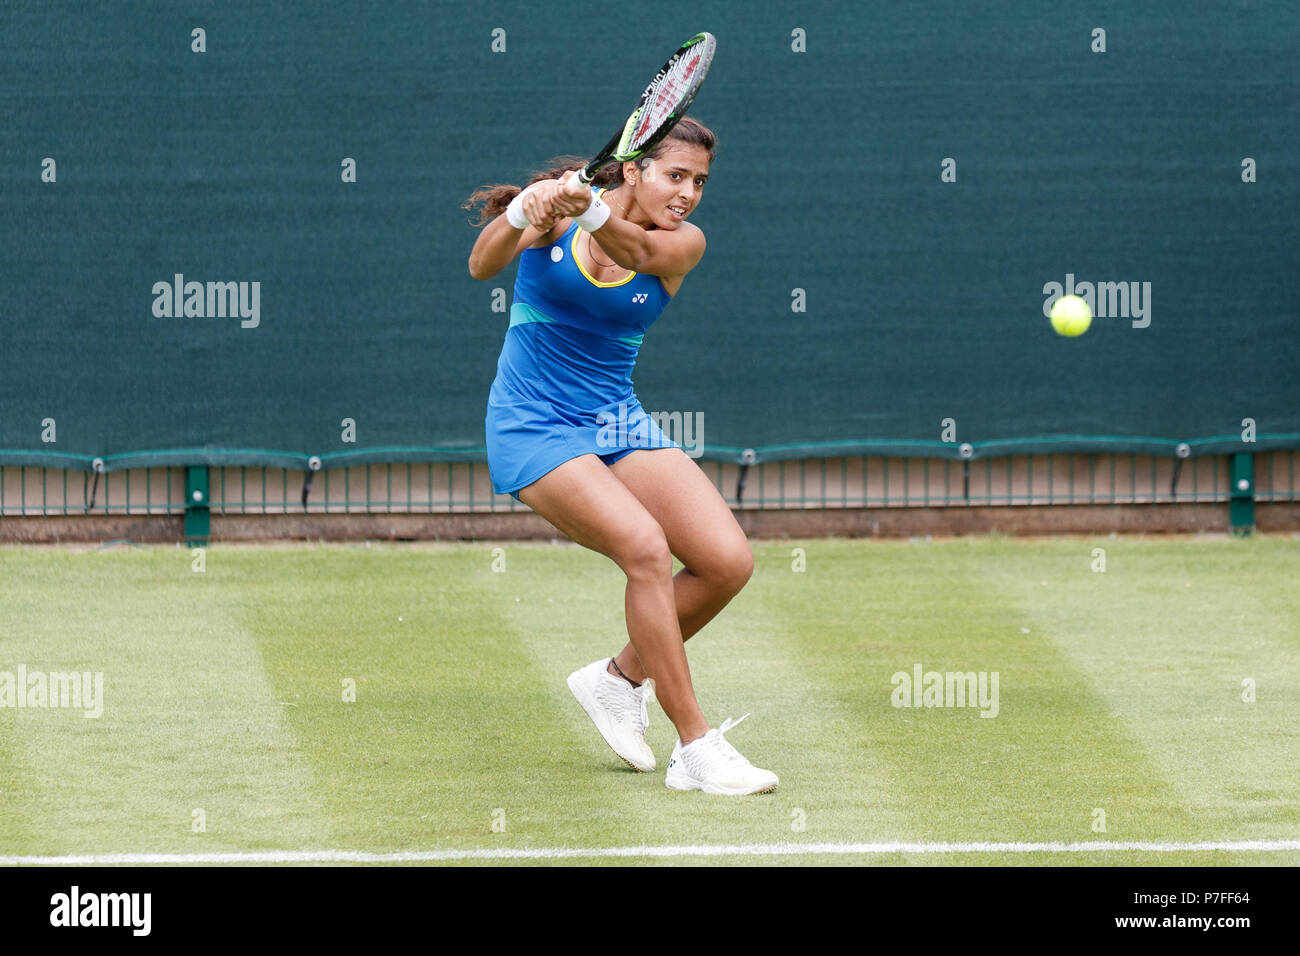 Ankita Raina plays a shot while in action at the 2018 Nature Valley Classic in Birmingham, UK. Stock Photo